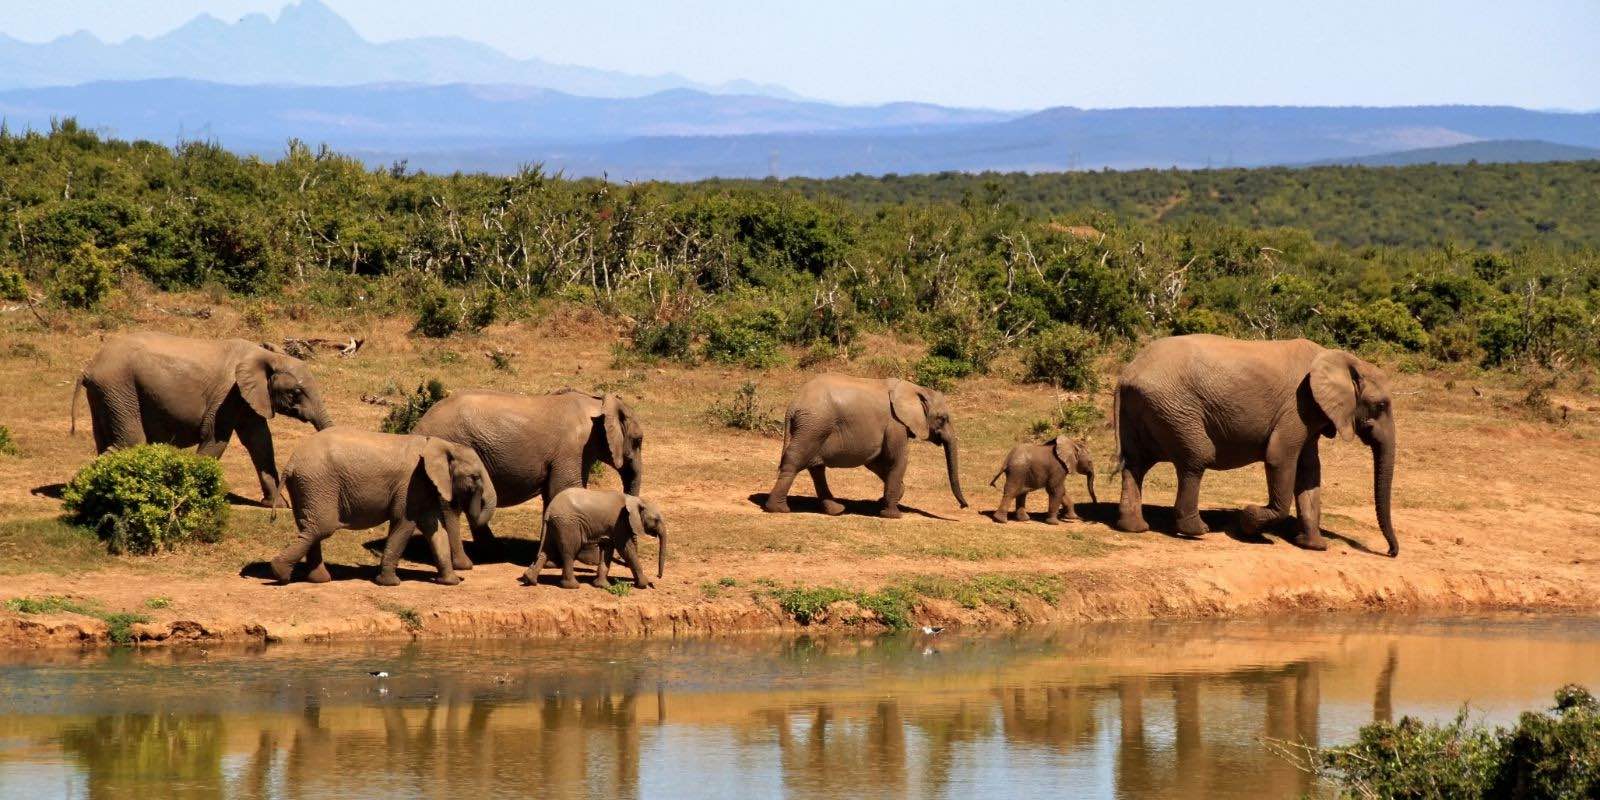 elephants walking by the river during daytime